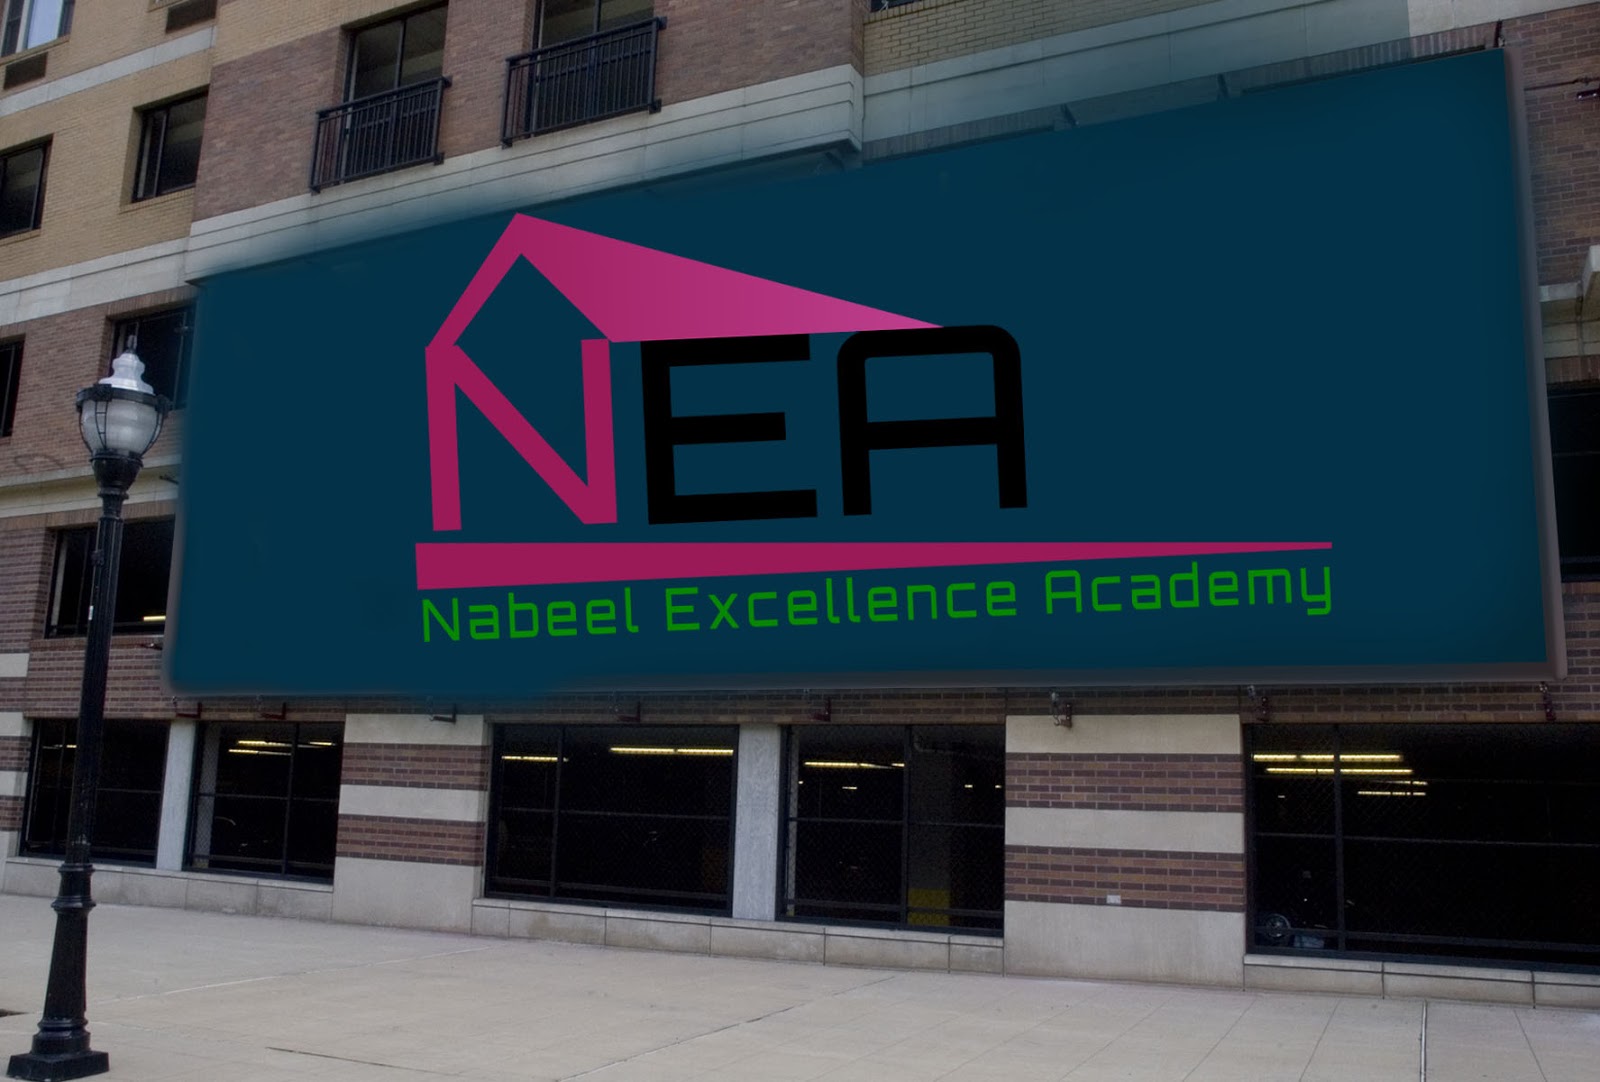 About Nea Nabeel Excellence Academy